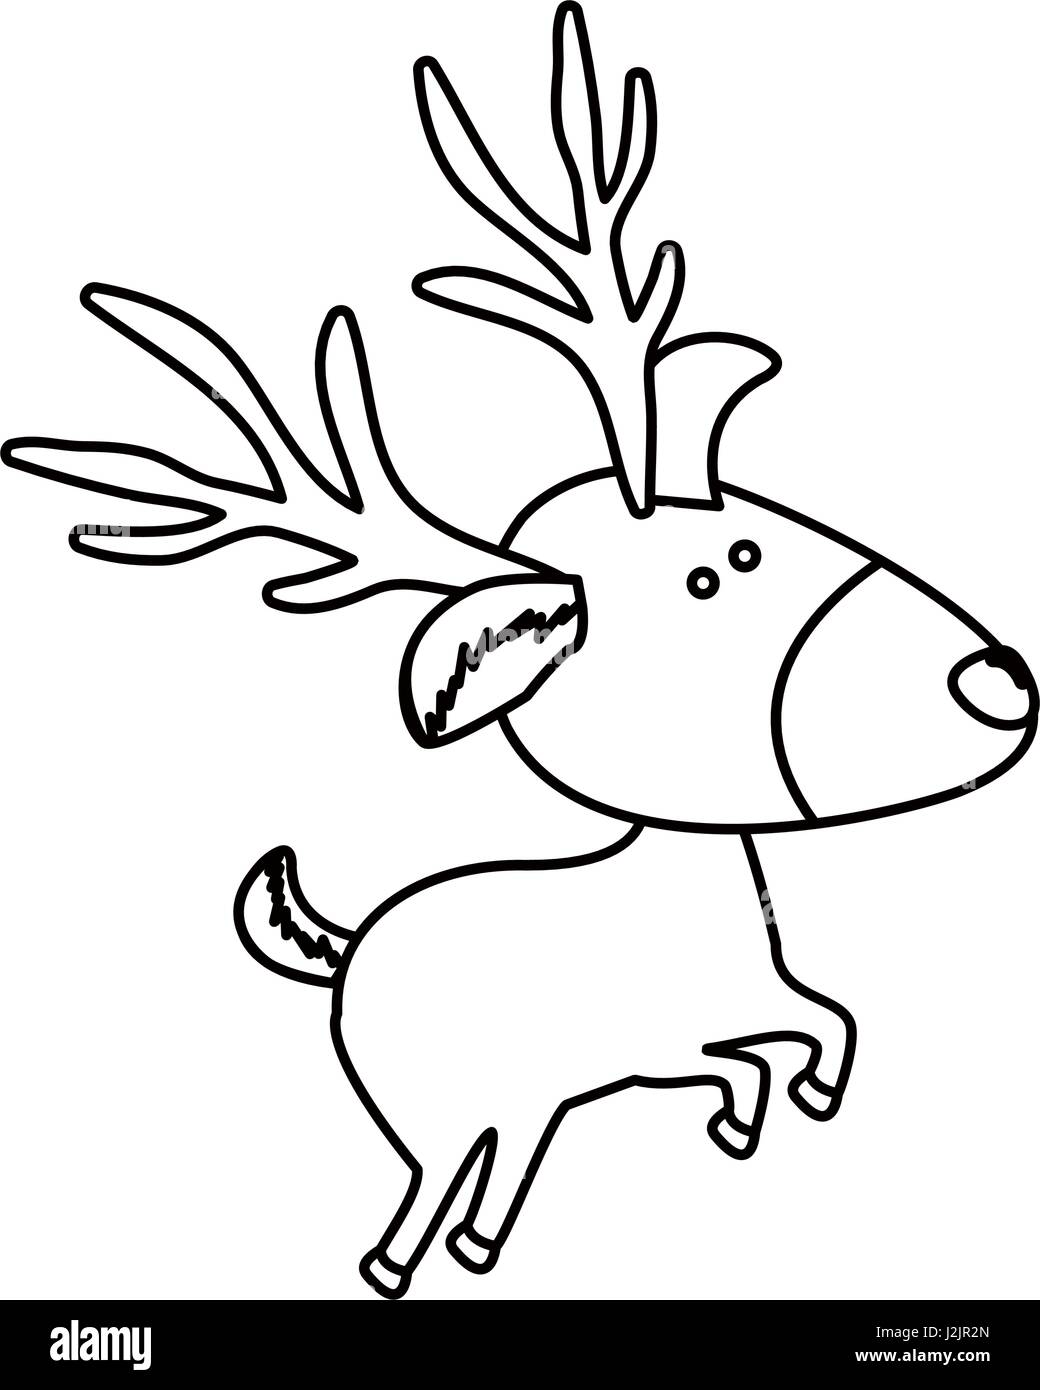 monochrome contour of caricature reindeer jumping Stock Vector Image ...